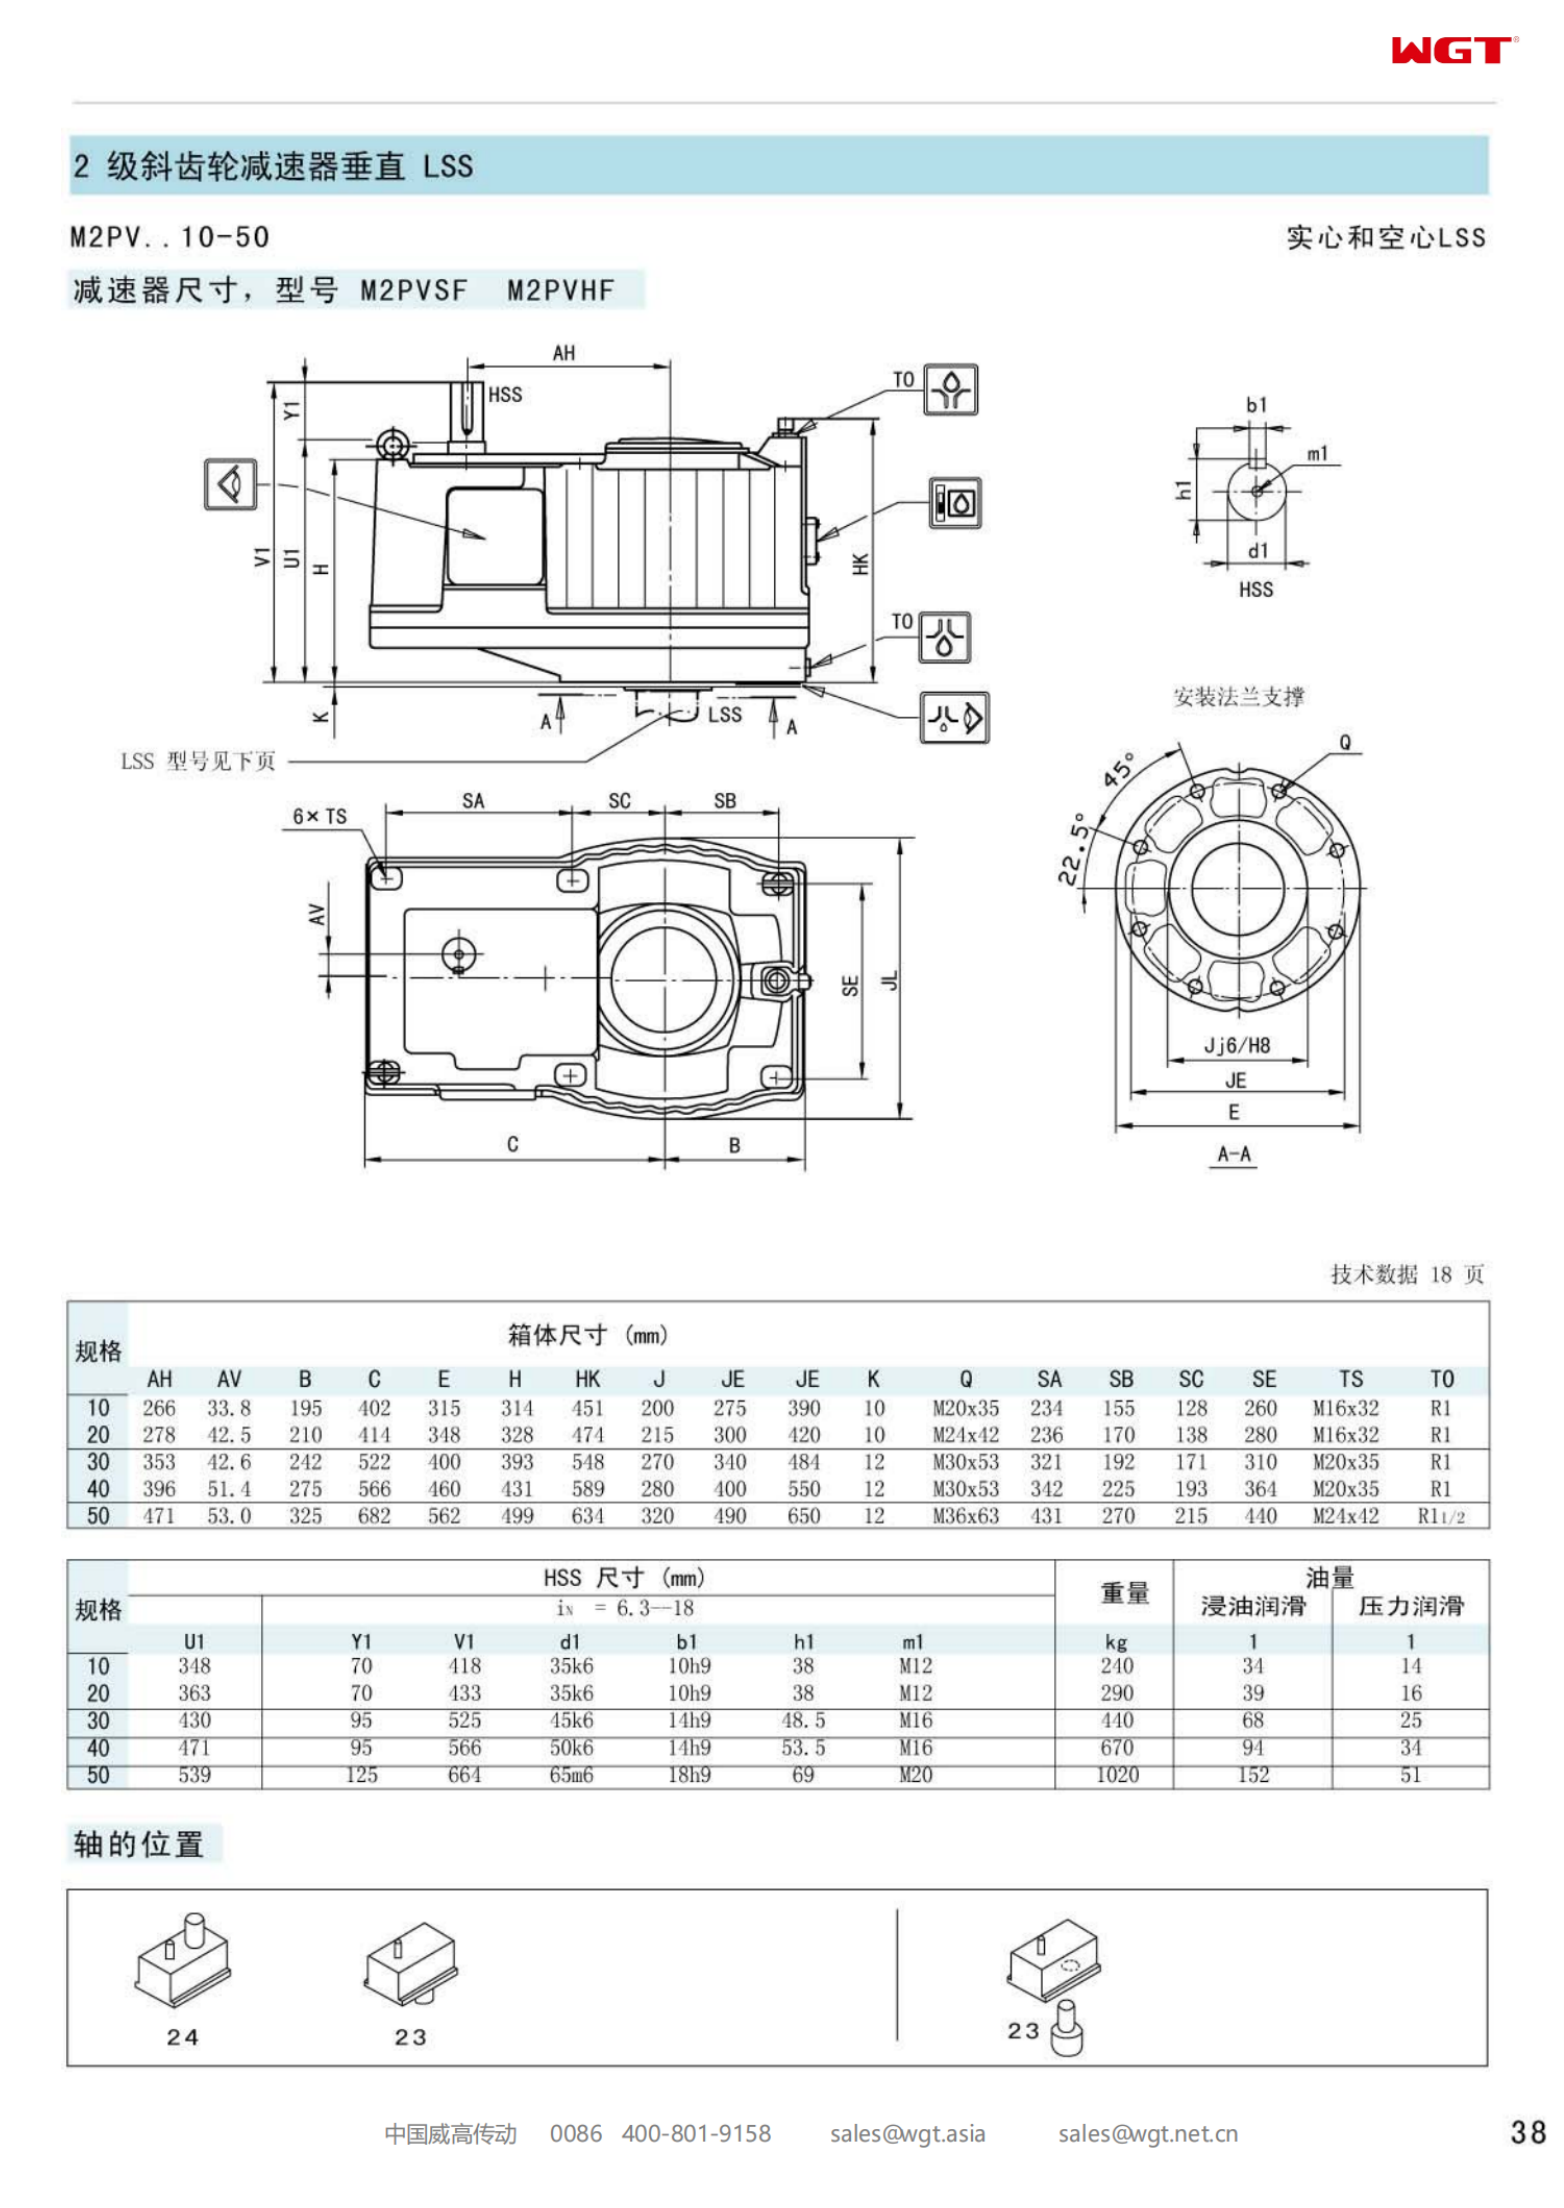 M2PVHF20 Replace_SEW_M_Series Gearbox